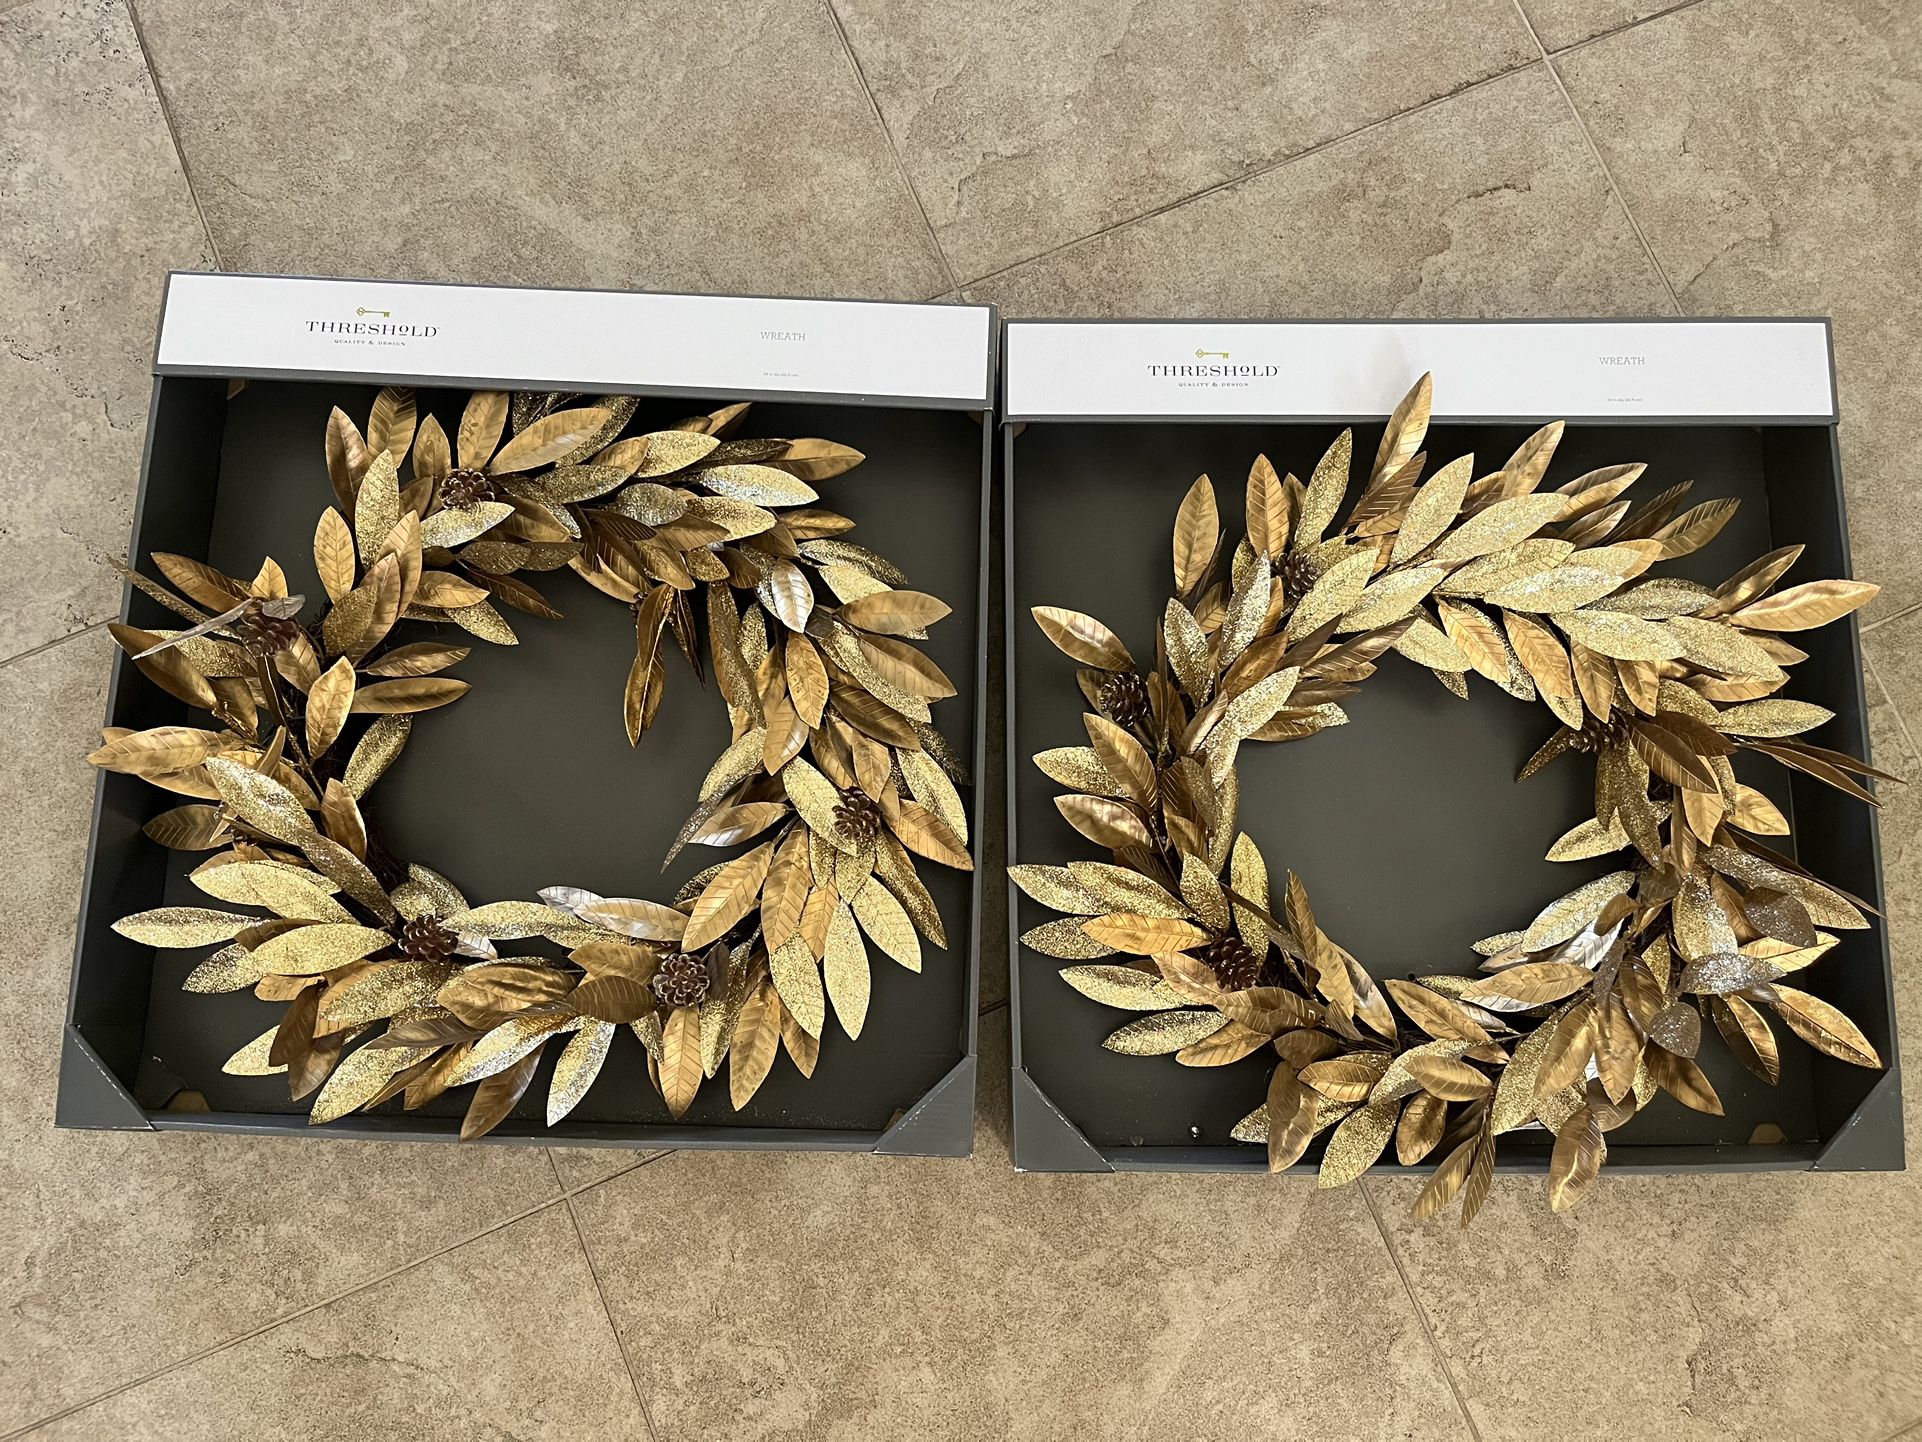 Two brand new rare gold wreaths 